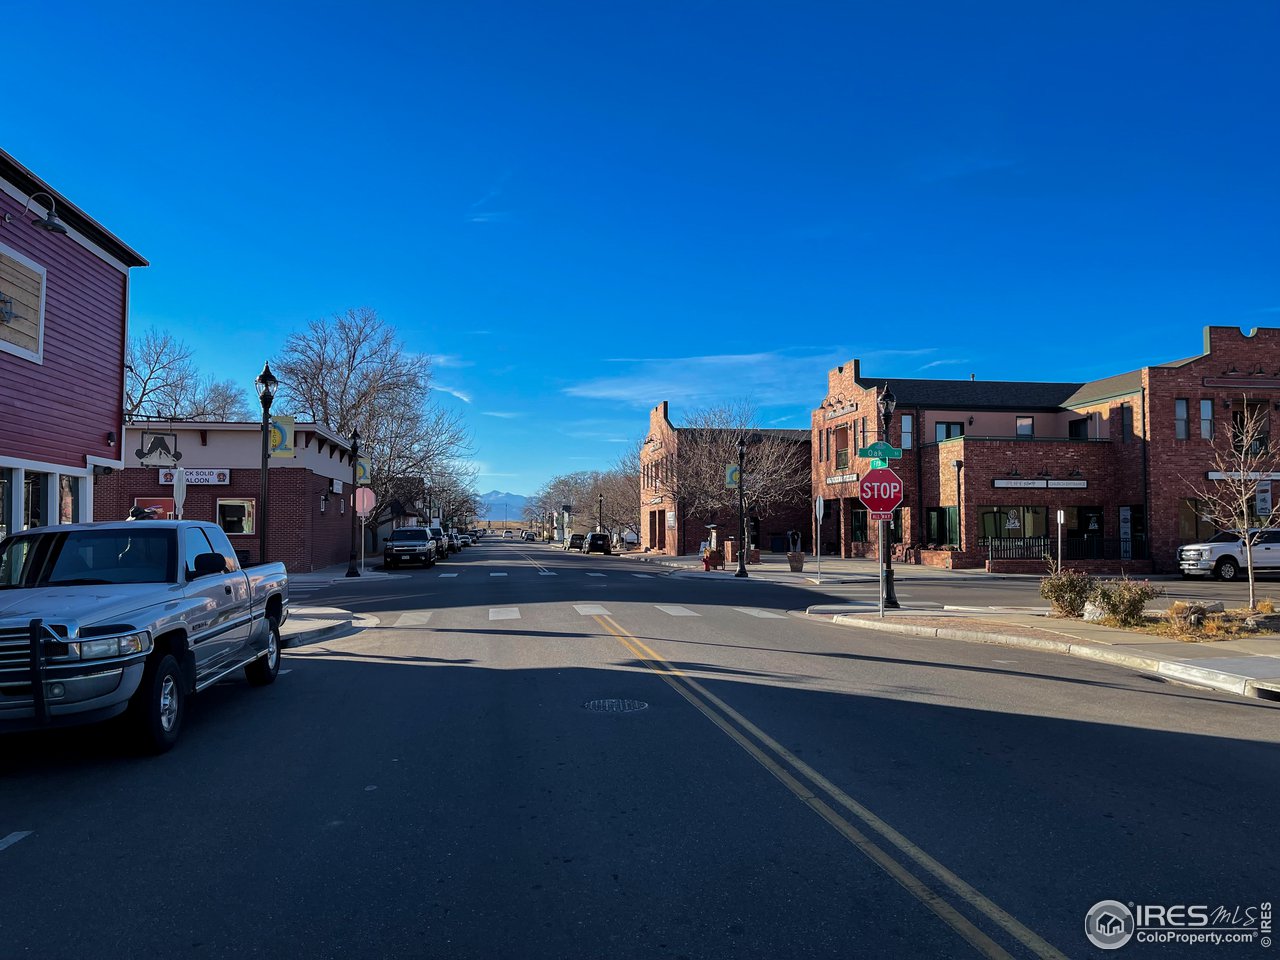 234 5th St has great access to Frederick's vibrant 5th st with great views of the mountains and numerous restaurants and shops.